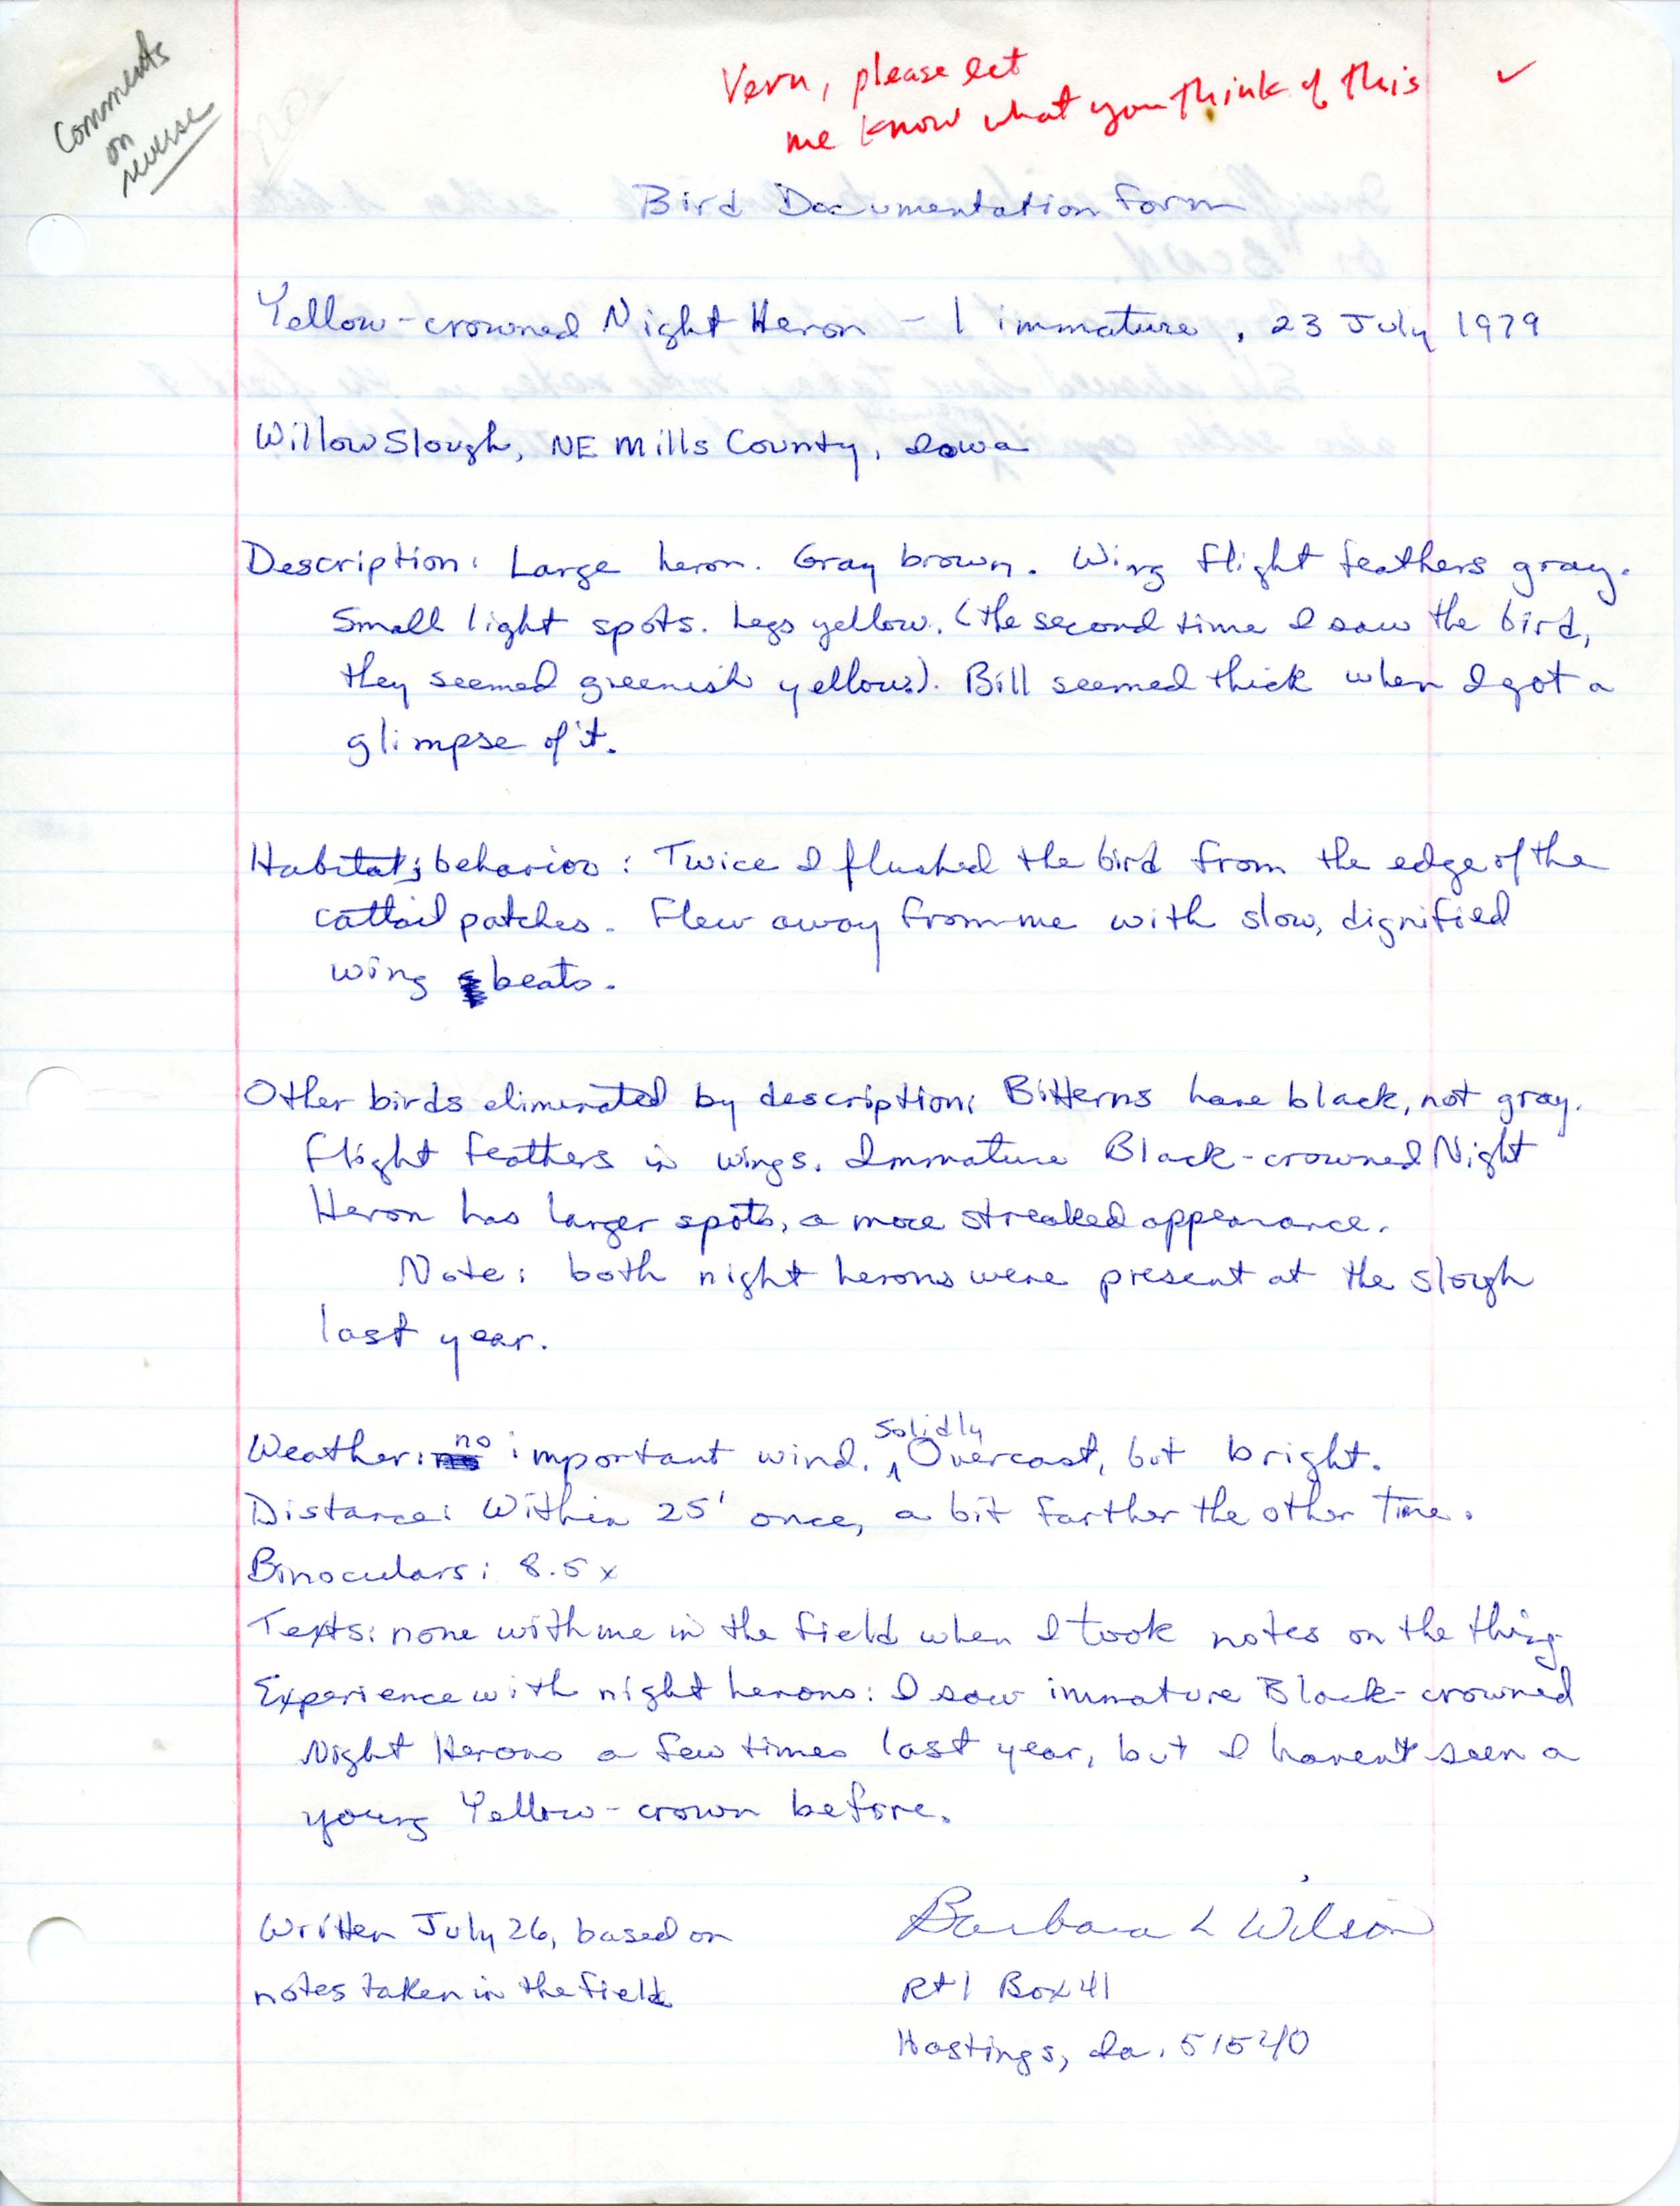 Rare bird documentation form for Yellow-crowned Night Heron at Willow Slough, 1979